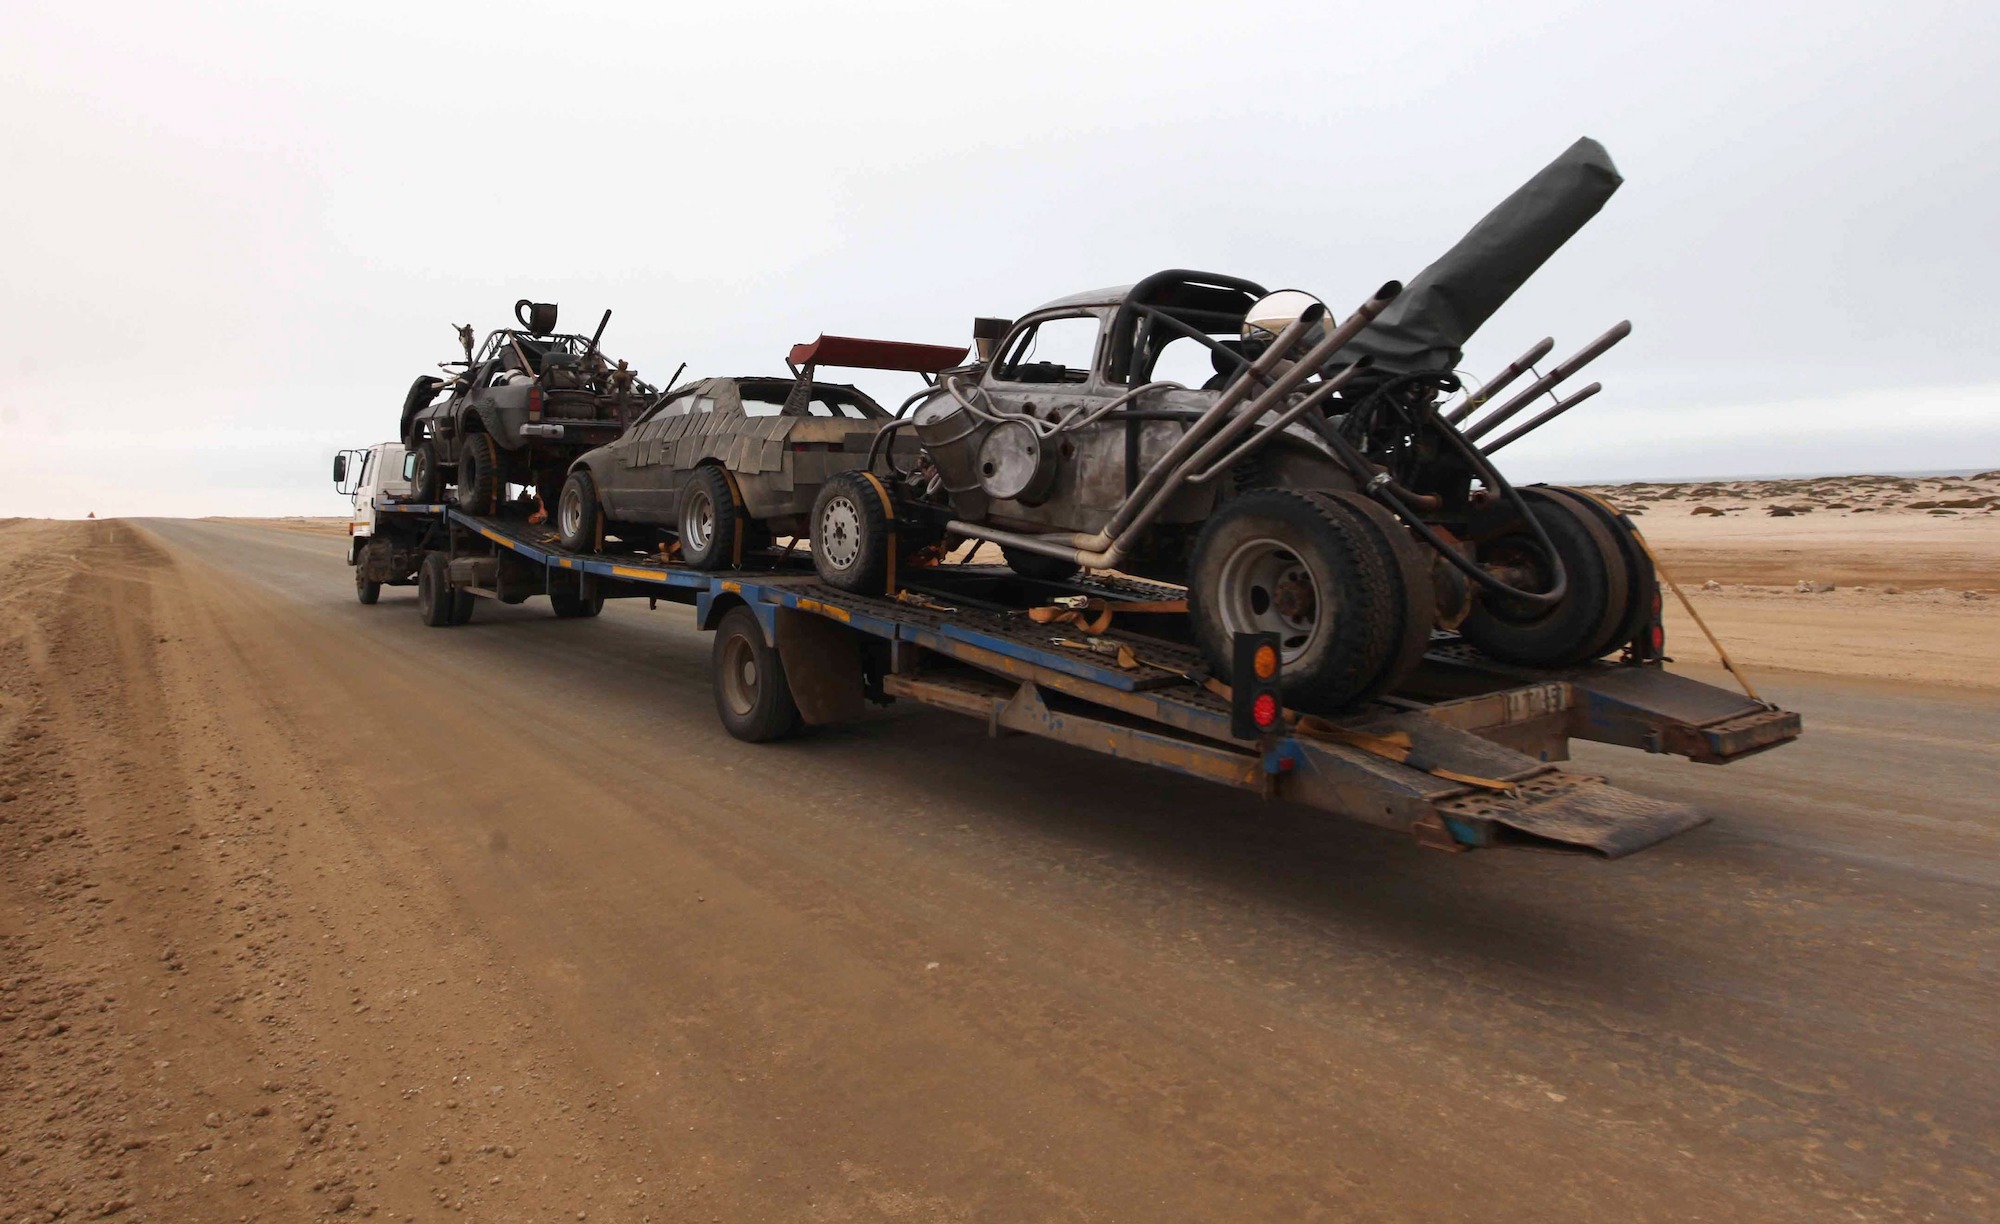 'Mad Max: Fury Road' cars are transported to the dunes outside Swakopmund, Namibia, in 2012